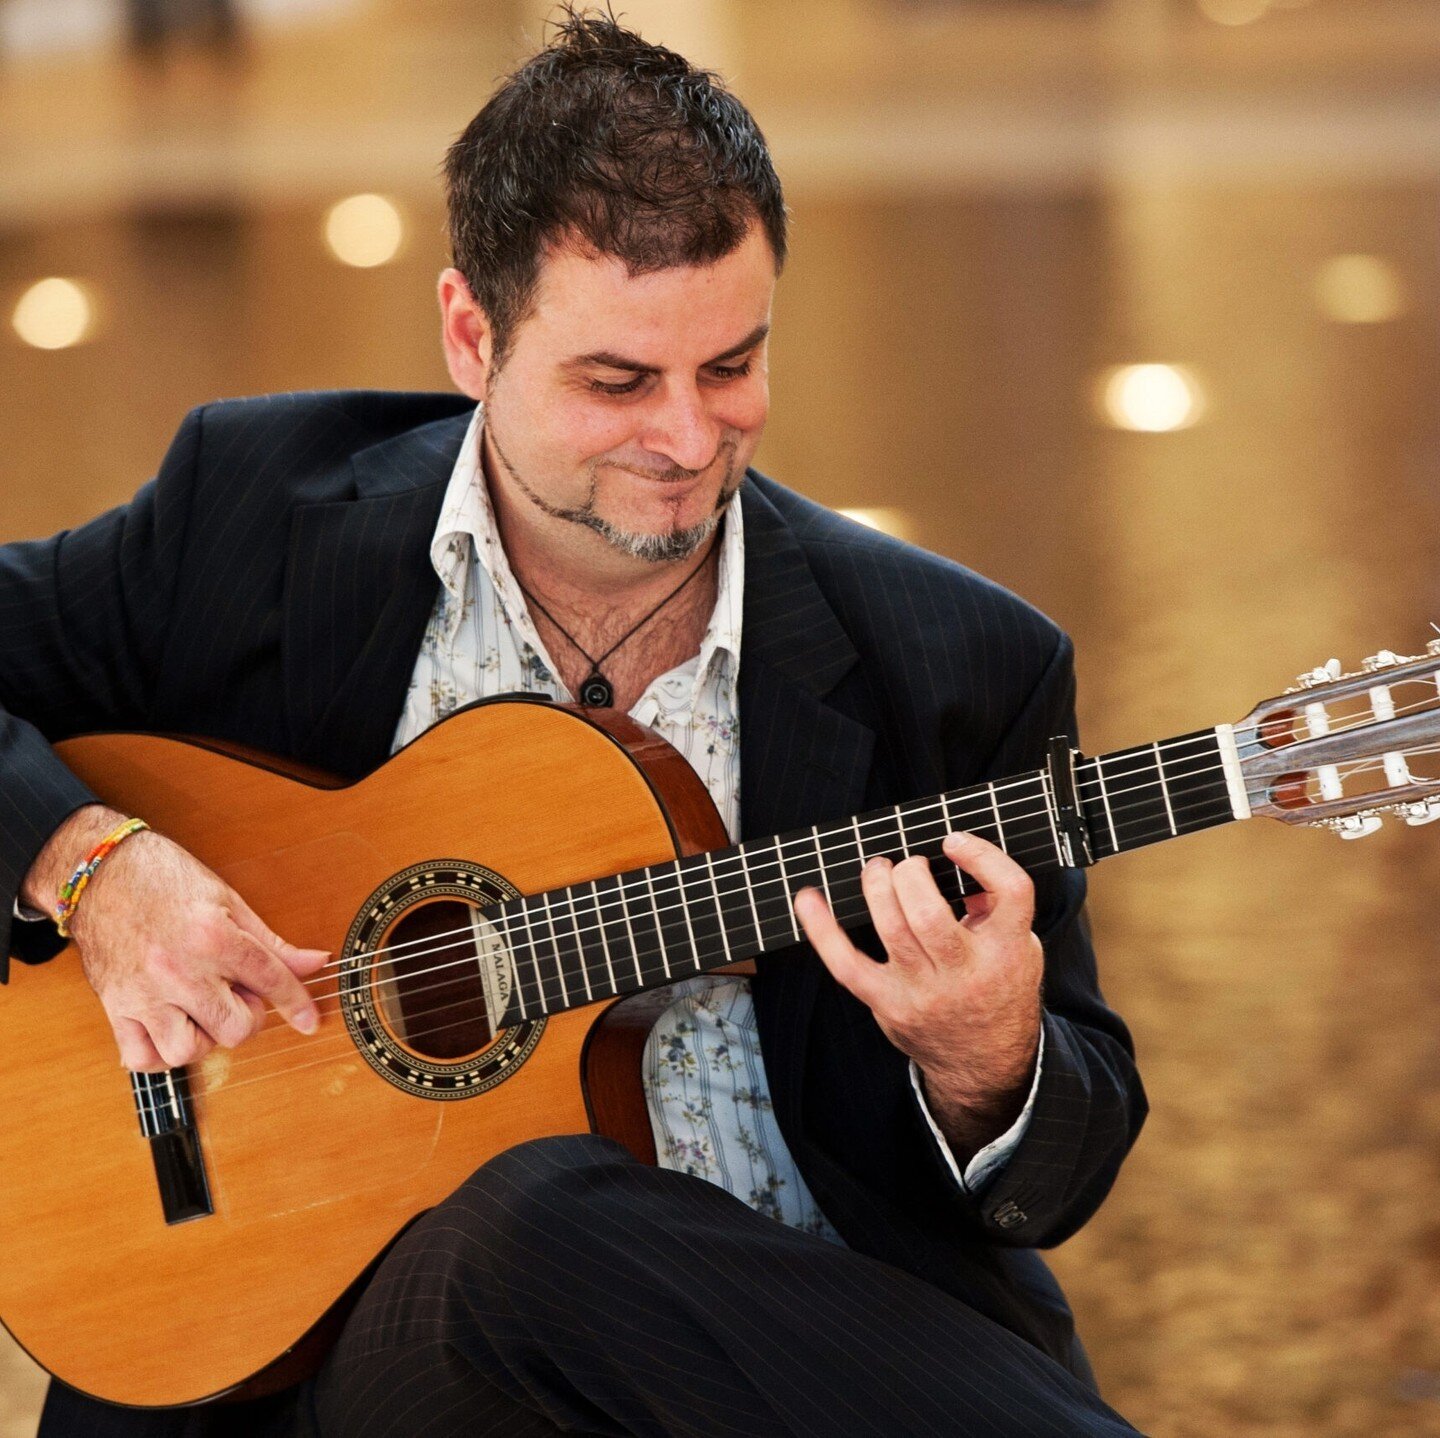 Enjoy the relaxing sounds of Flamenco and Jazz guitarist @camarondelavega from 10:30am - 2:30pm tomorrow 🎸⁠
⁠
This special event is free for Citron guests. To avoid disappointment, lunch bookings are recommended. Visit the link in our bio to reserve